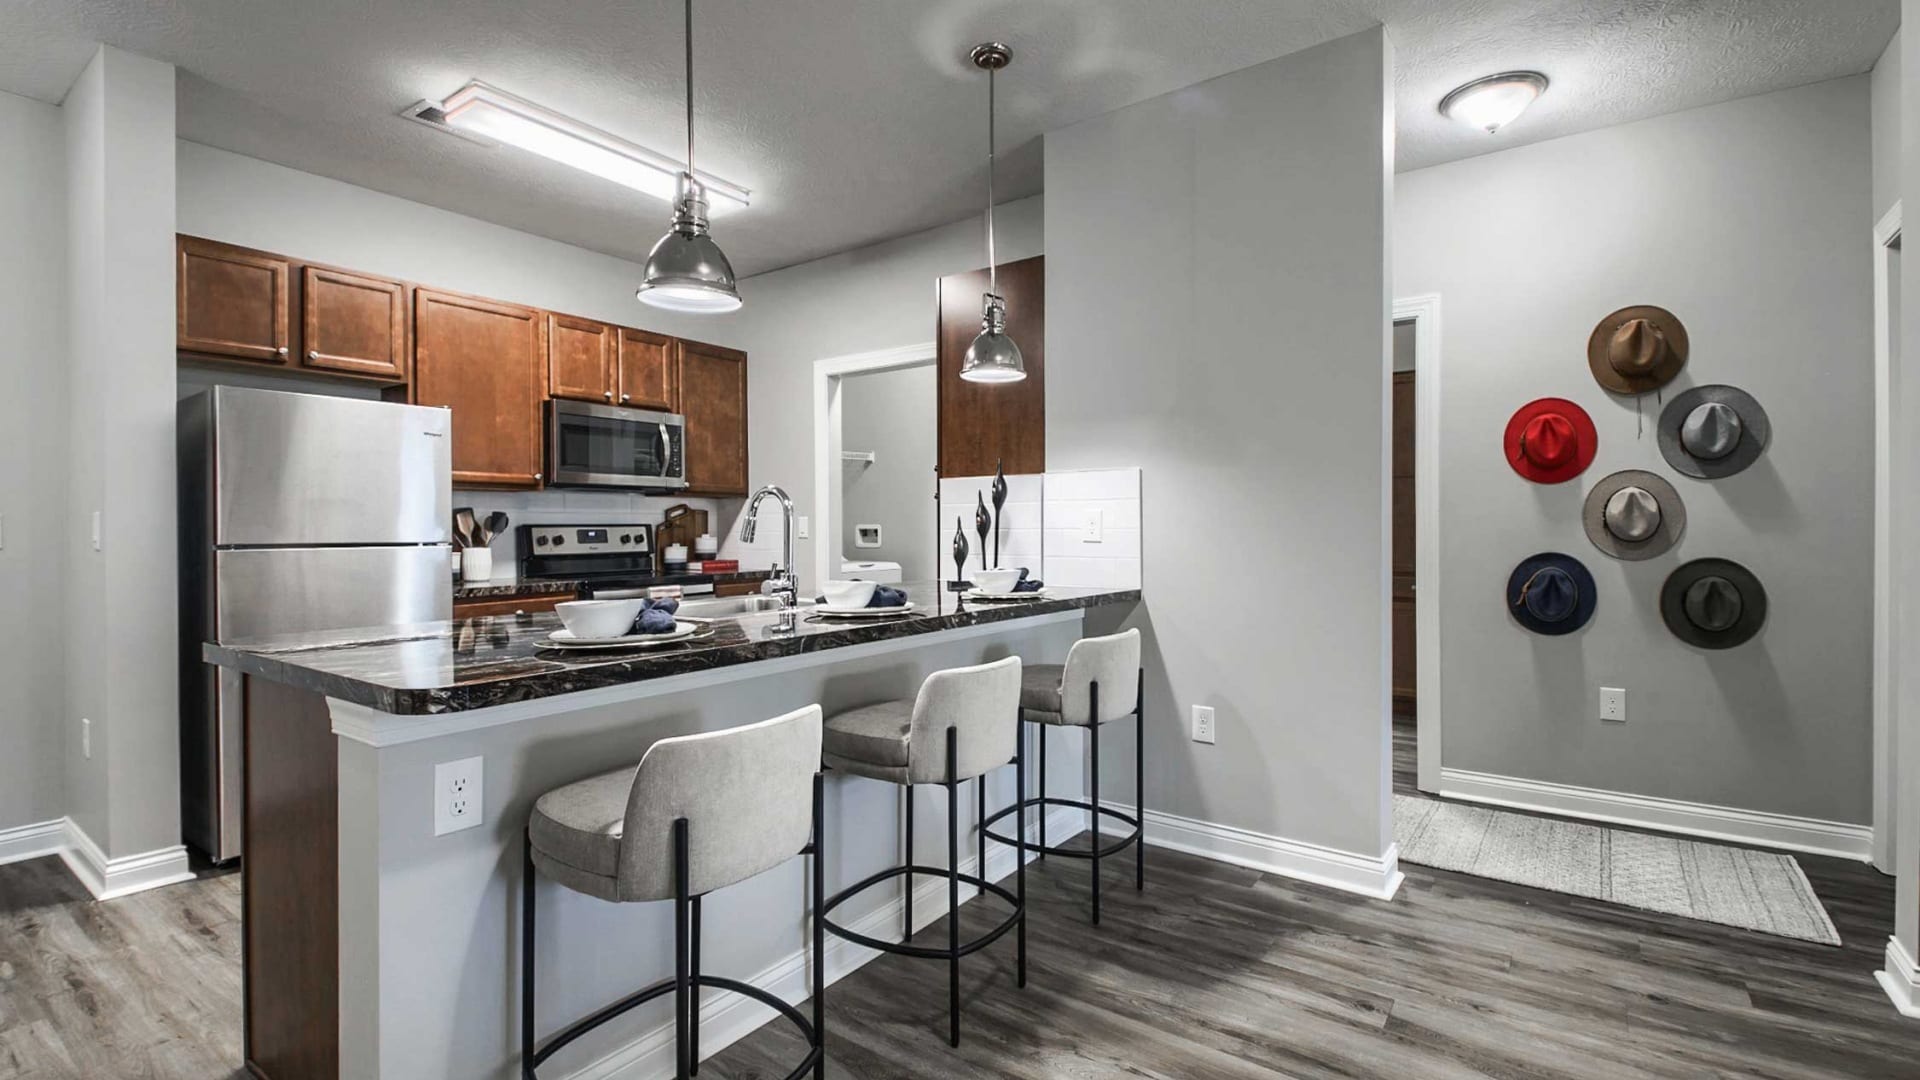 Modern, Open-Concept Kitchen At Our Apartments in Olentangy School District